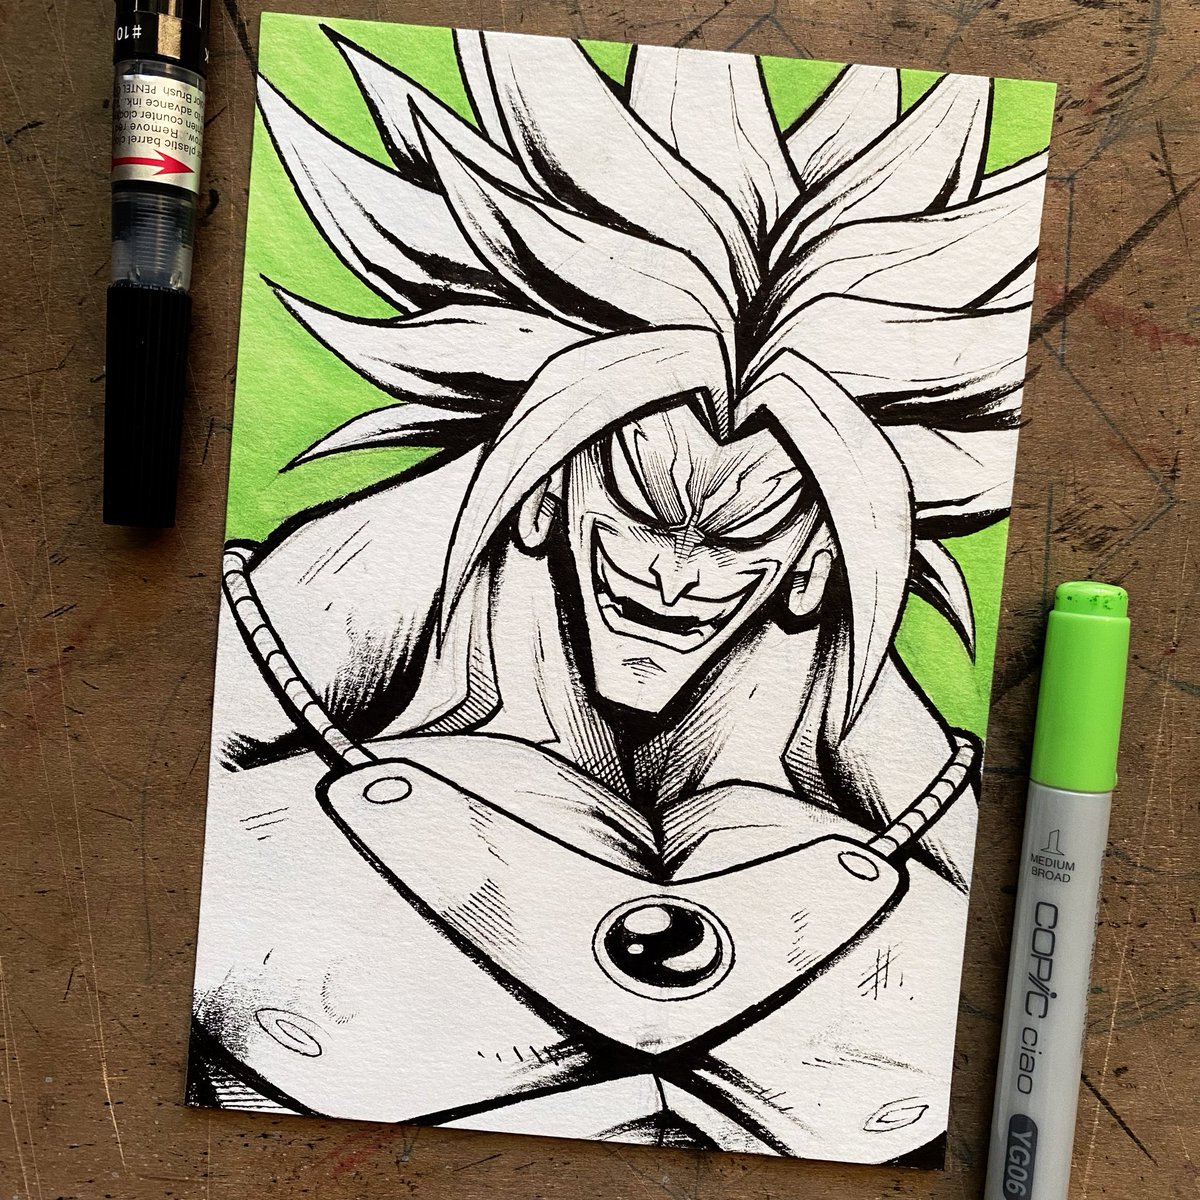 - BROLY -

With a touch of green. 

#broly #dragonball #dragonballsuper #dragonballz